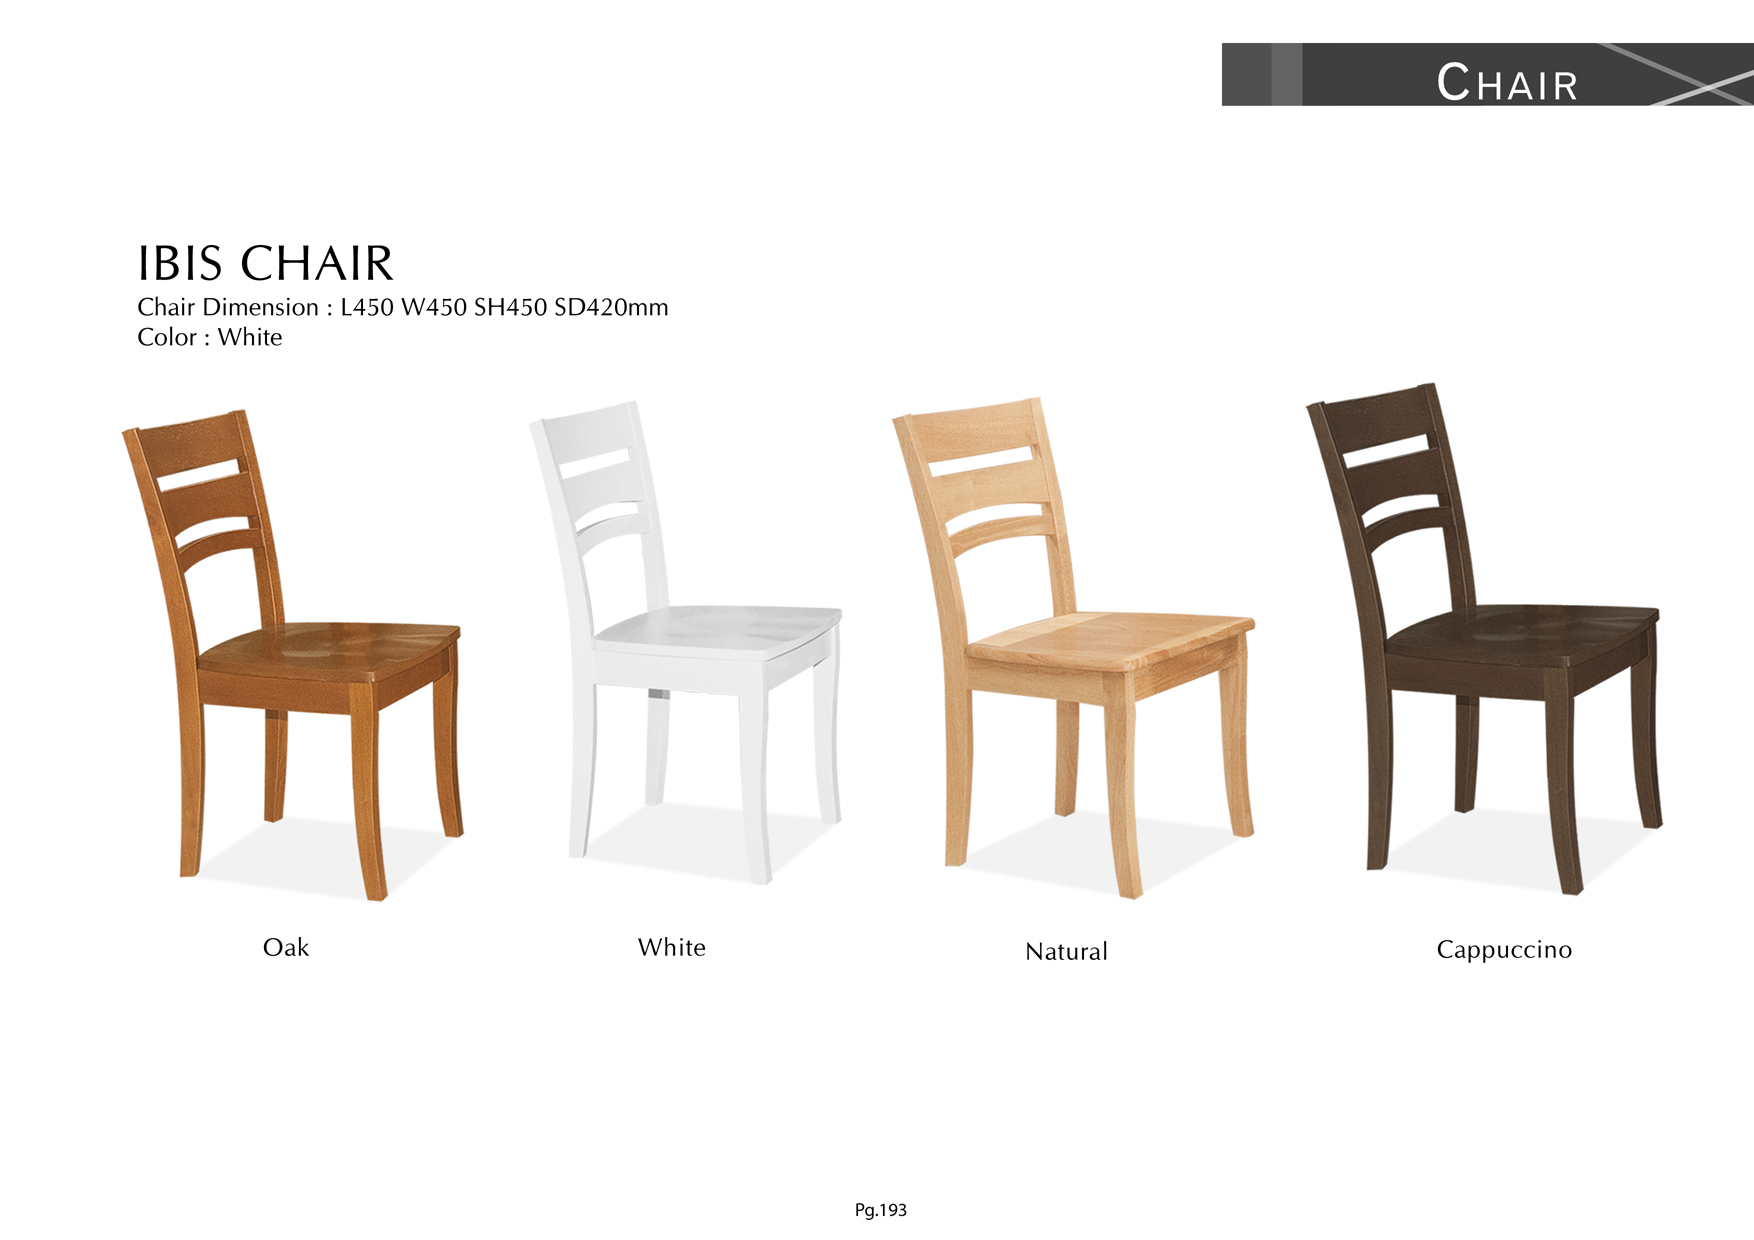 Product: PG193. IBIS CHAIR